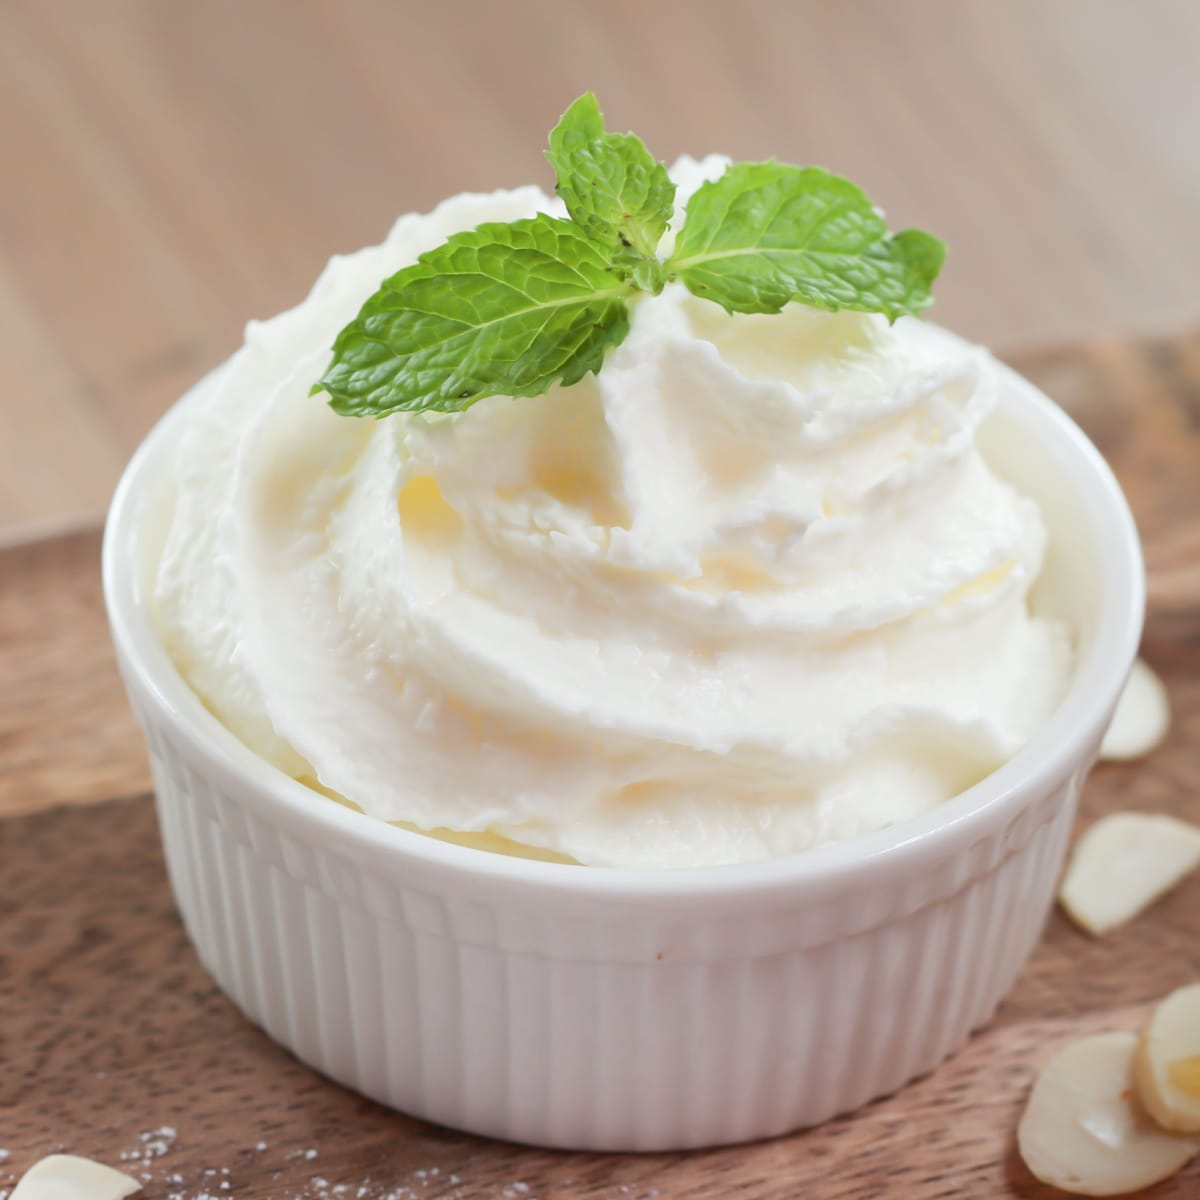 What is the difference between cool whip and whipped cream? - Quora